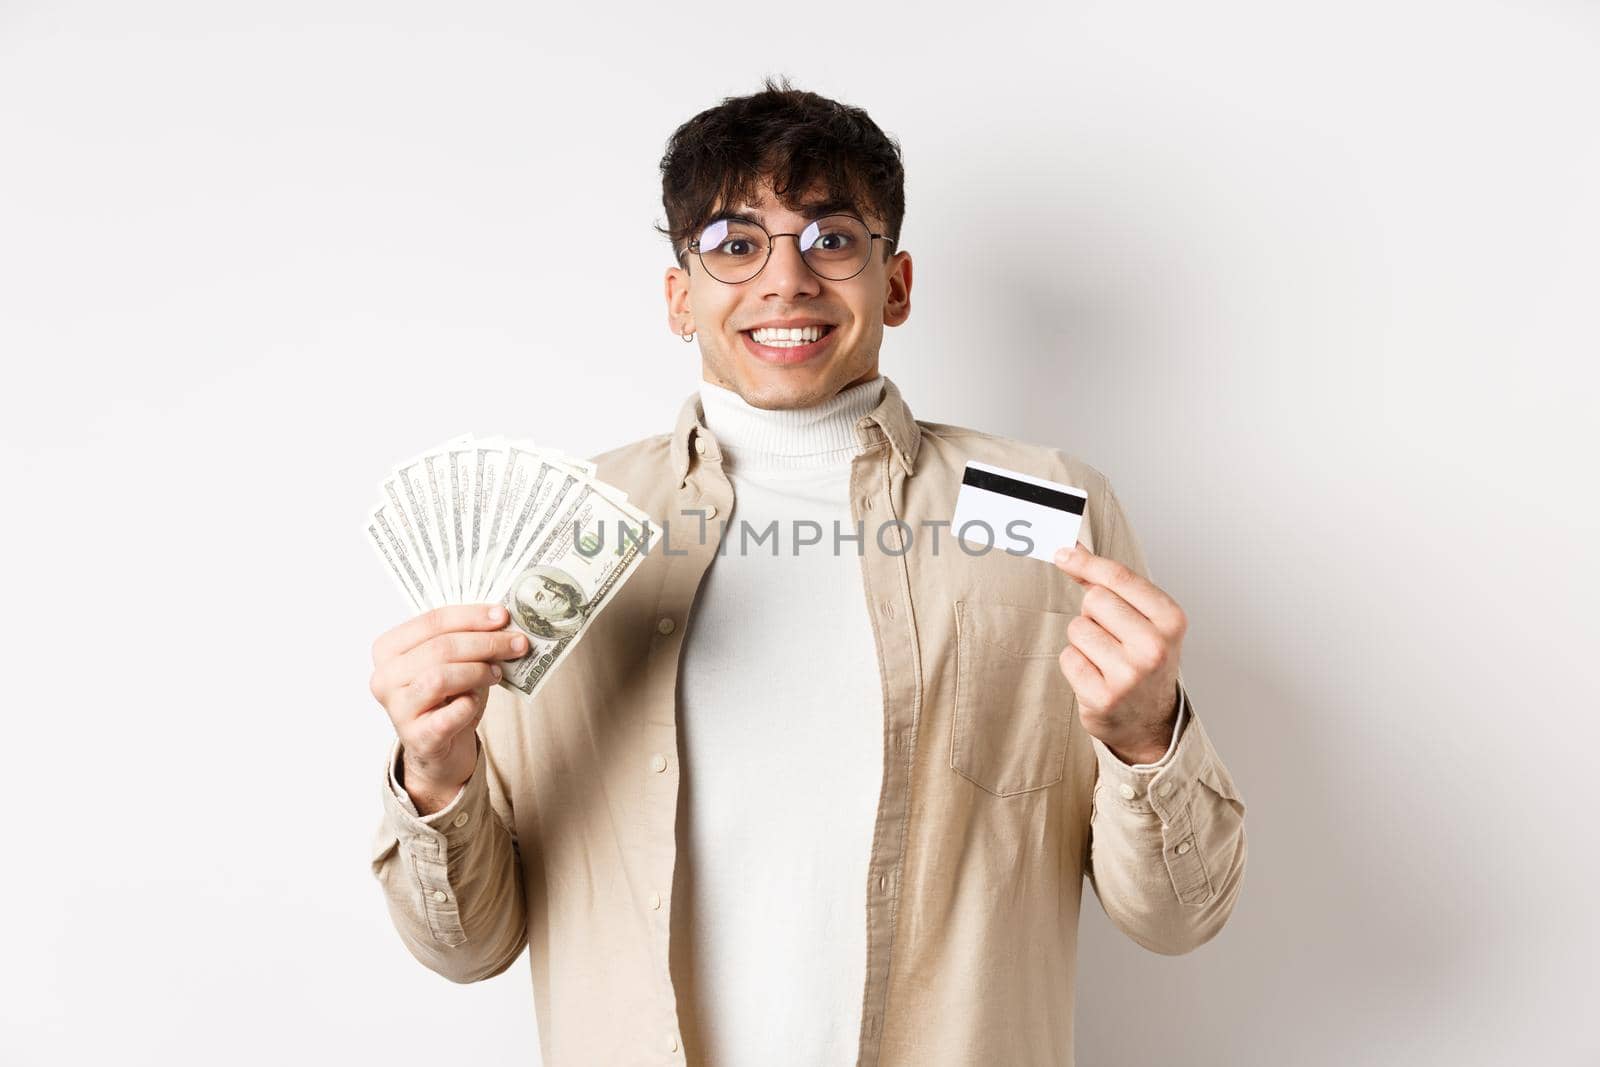 Excited and happy smiling man holding money and plastic credit card, looking amused at camera, standing on white background.